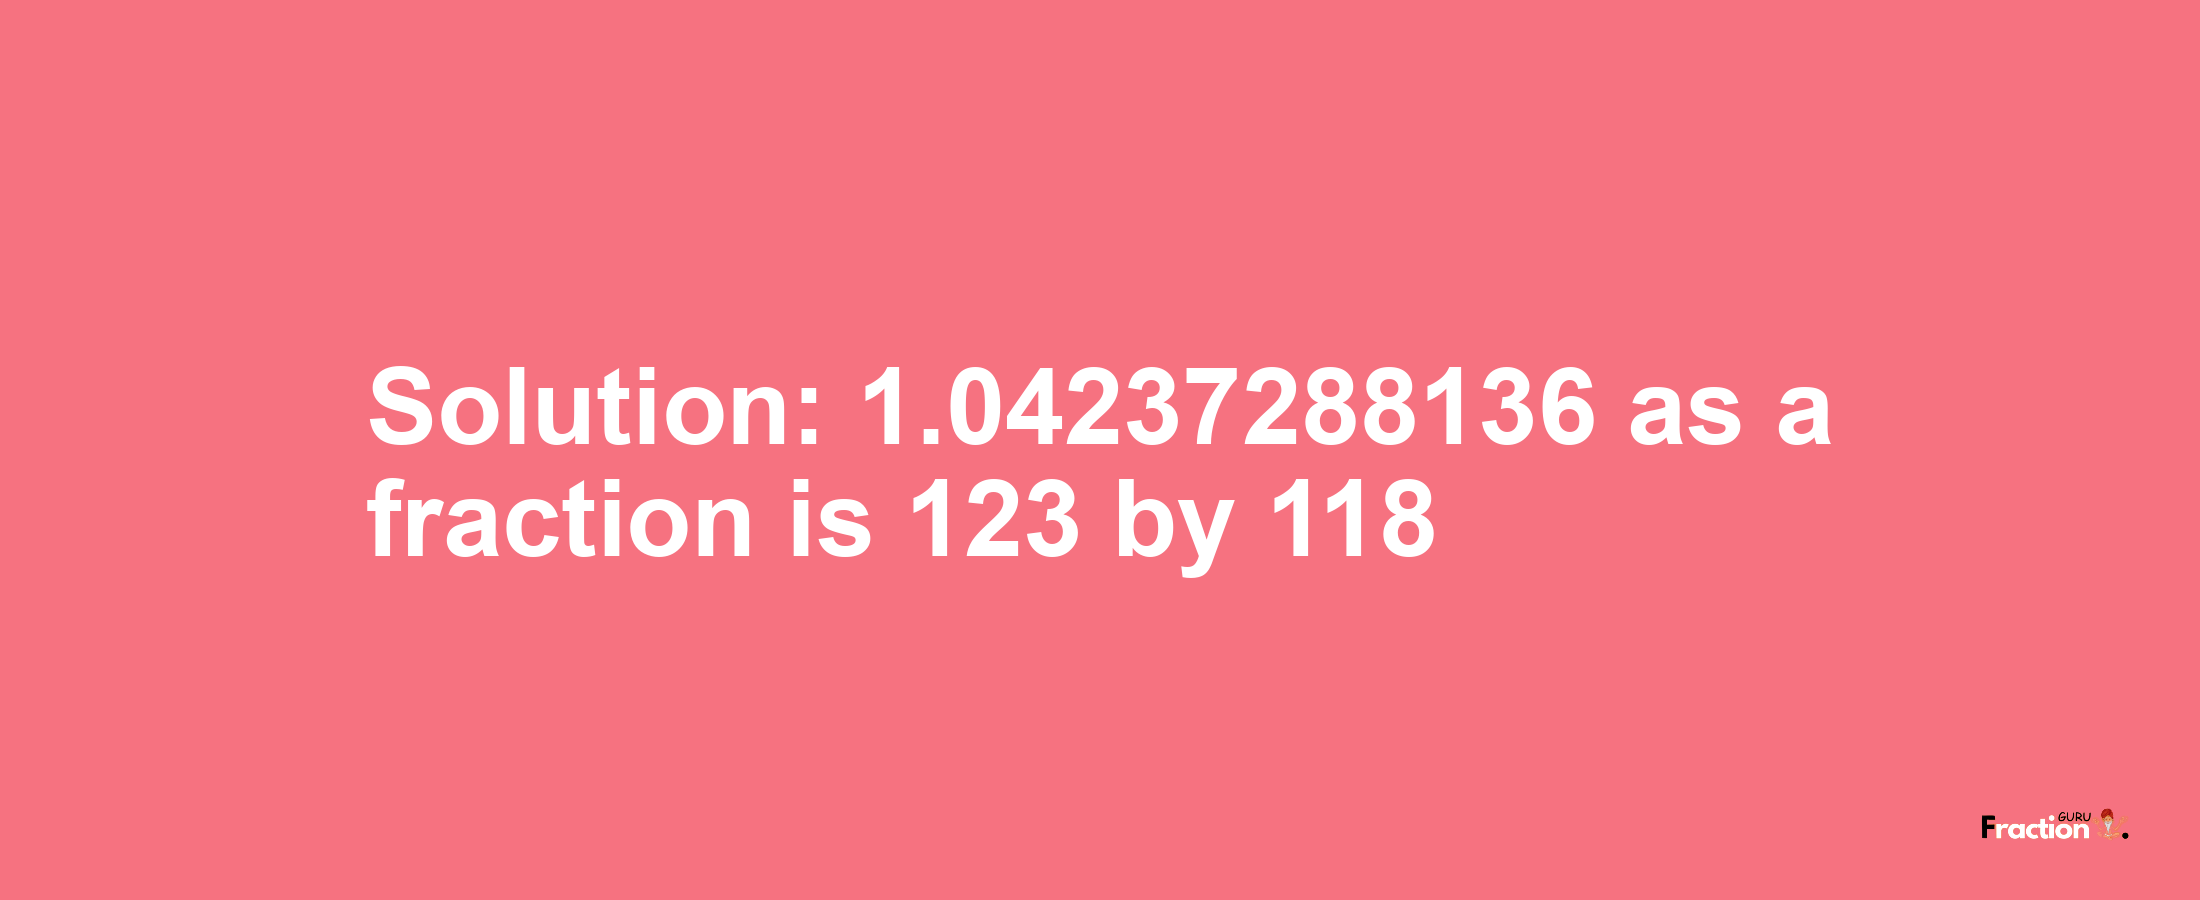 Solution:1.04237288136 as a fraction is 123/118